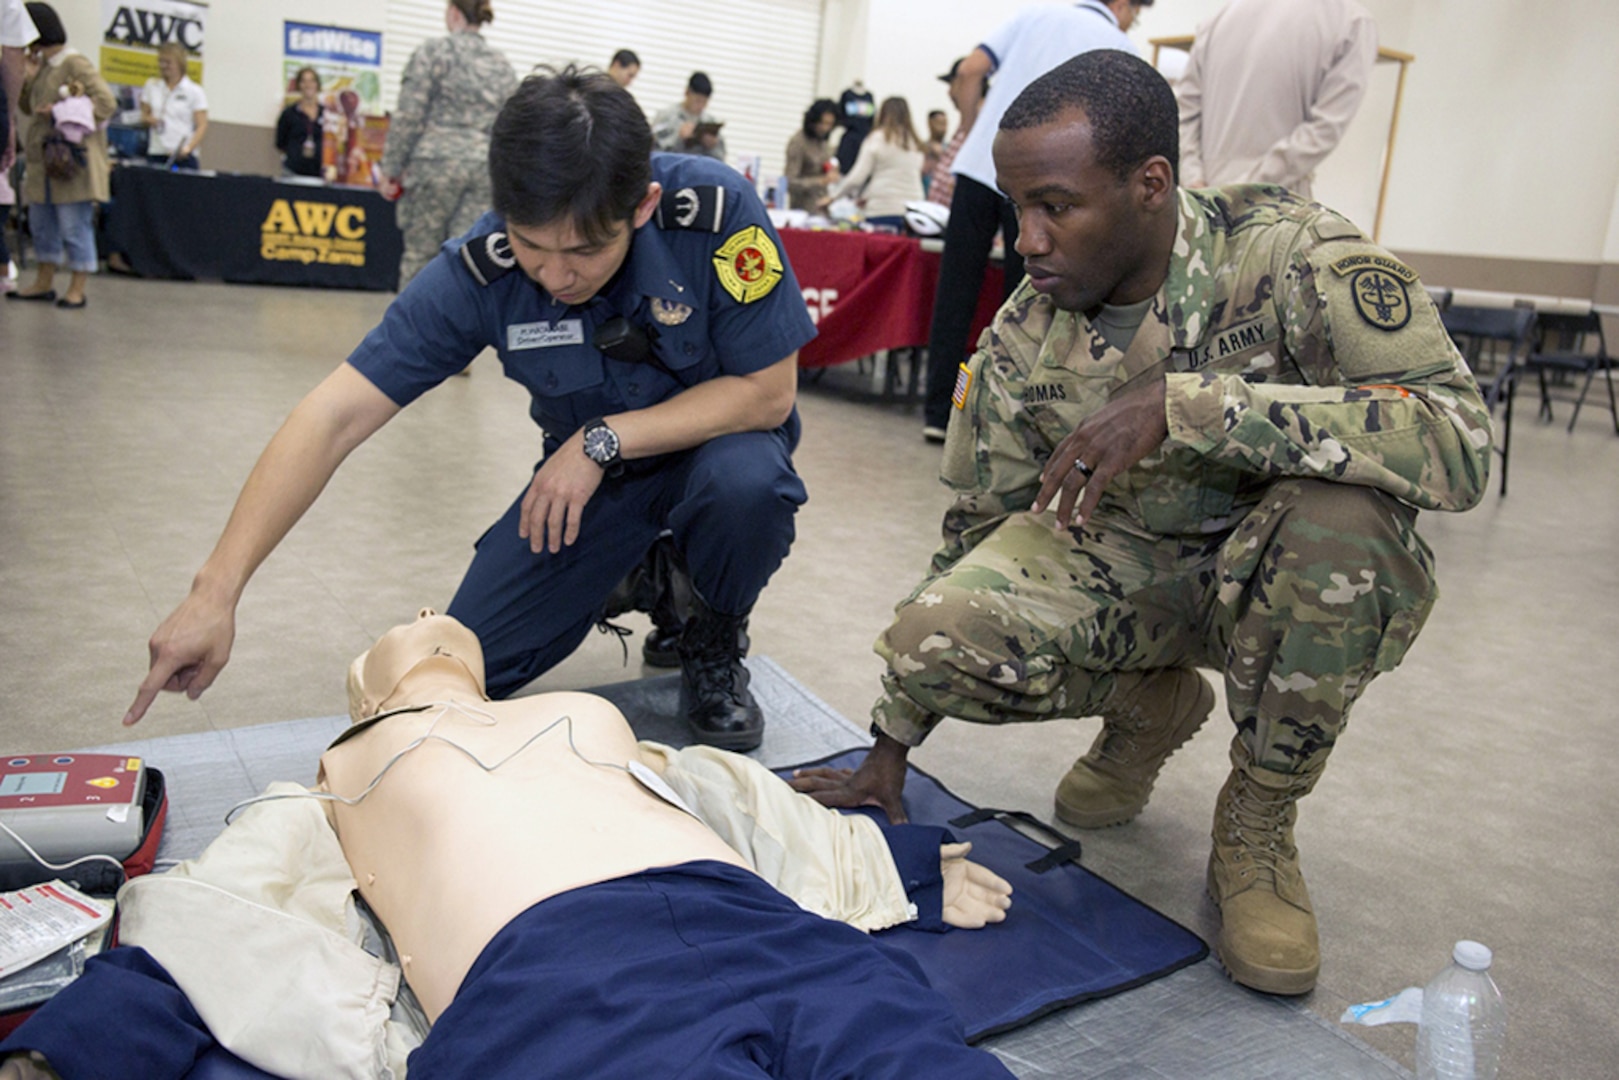 CAMP ZAMA, Japan (Oct. 28, 2015) - Pfc. Sherrad Thomas, assigned to Medical Command, Public Health Command Region-Pacific, learns about CPR and the automated external defibrillator from a Sagamihara City Fire Bureau employee during the fall/winter health and safety fair held Oct. 23 at the Camp Zama Community Activity Center. 